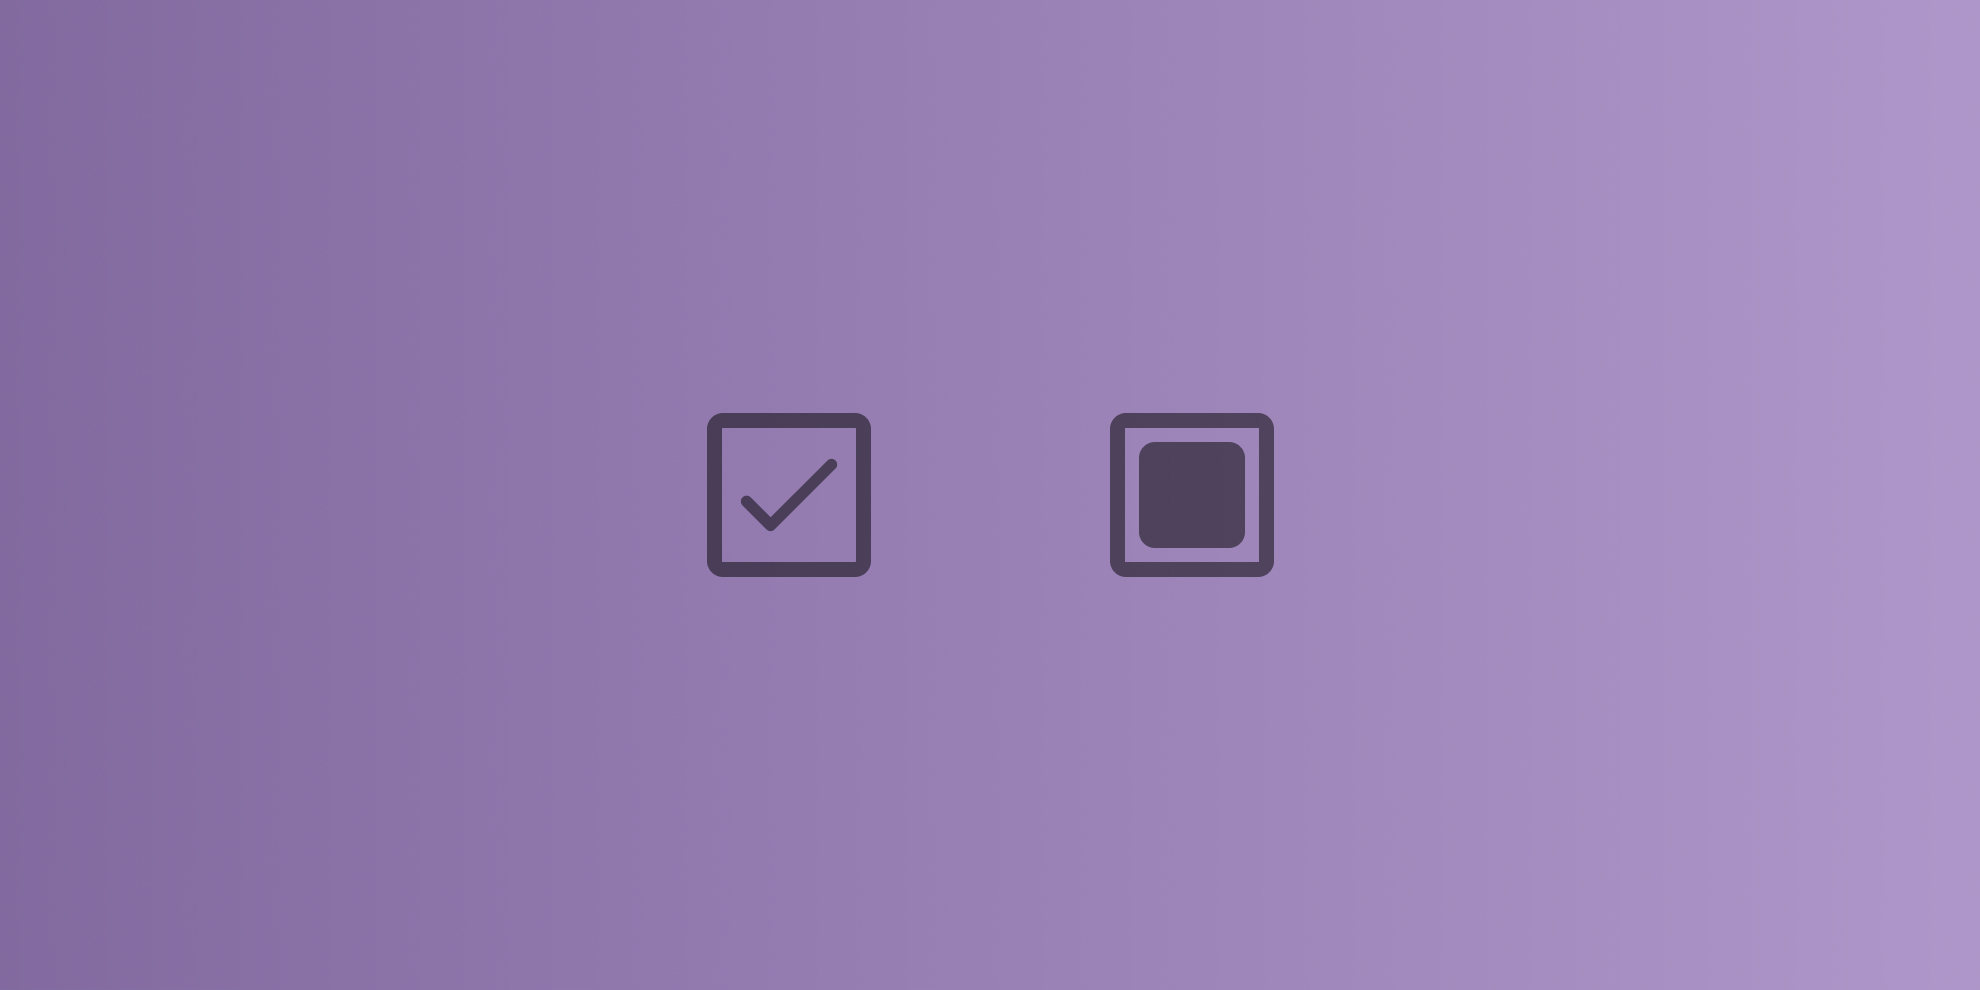 Custom CSS Checkbox and Buttons